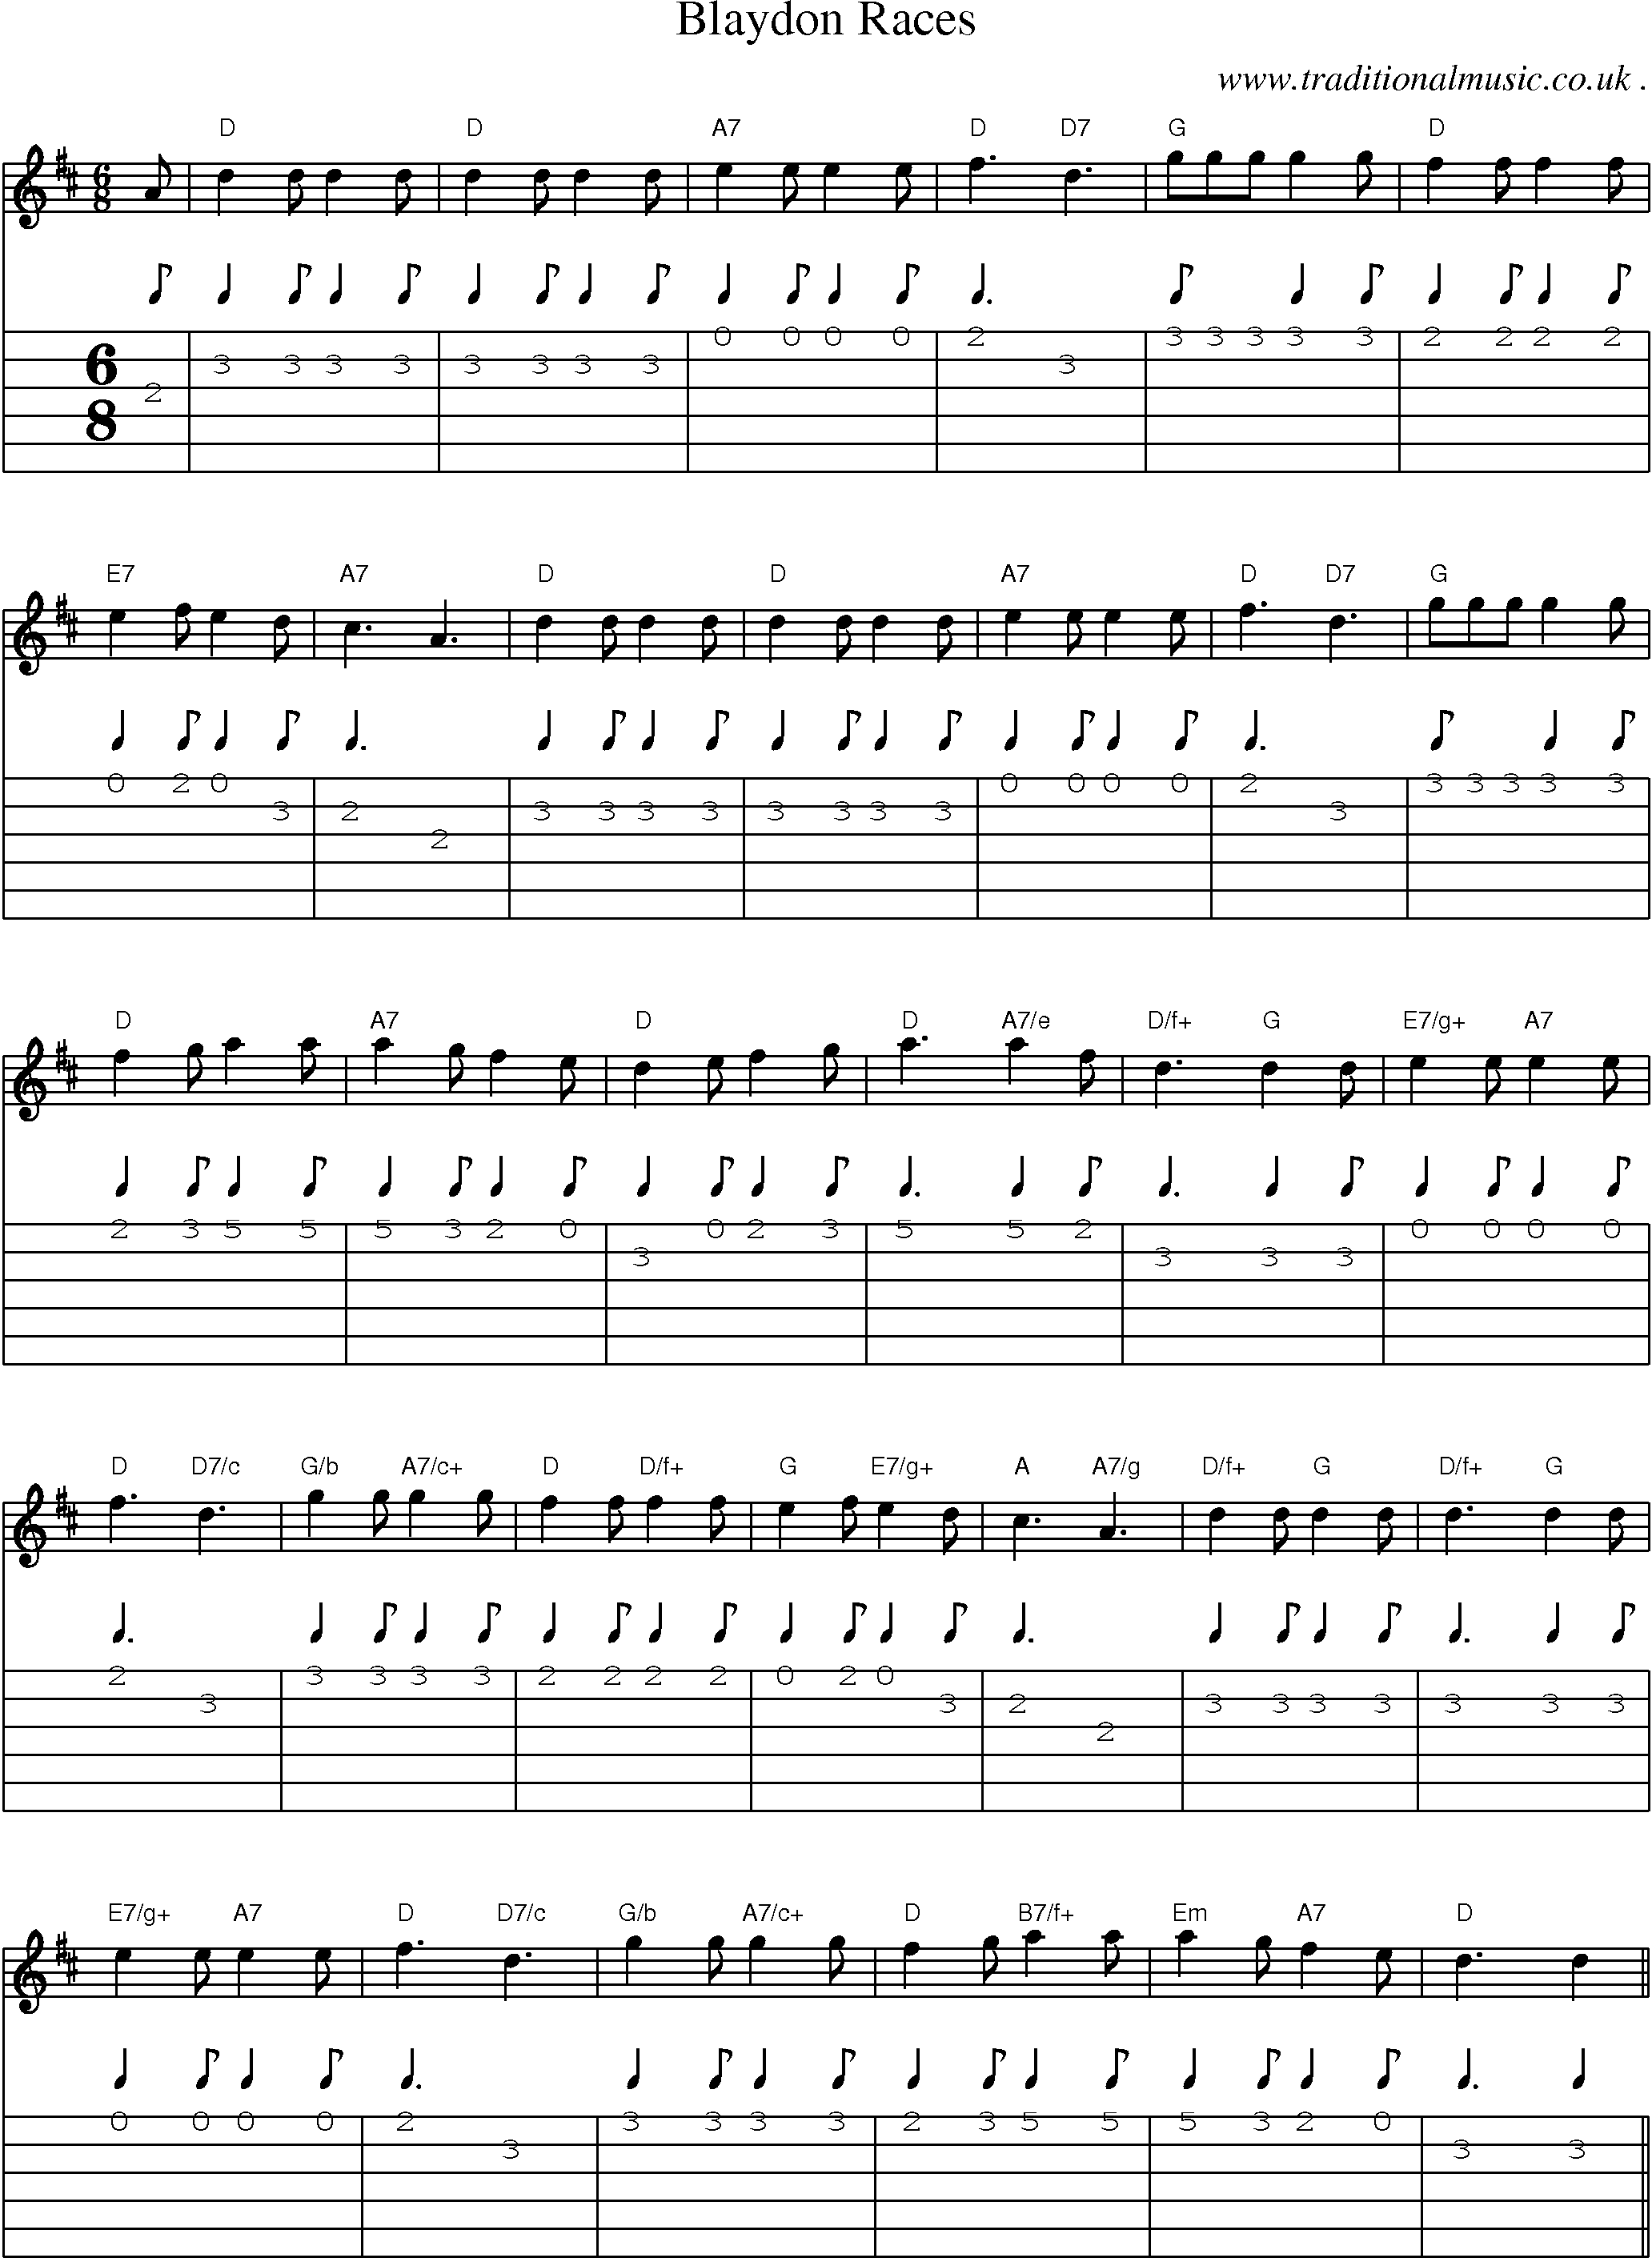 Sheet-Music and Guitar Tabs for Blaydon Races